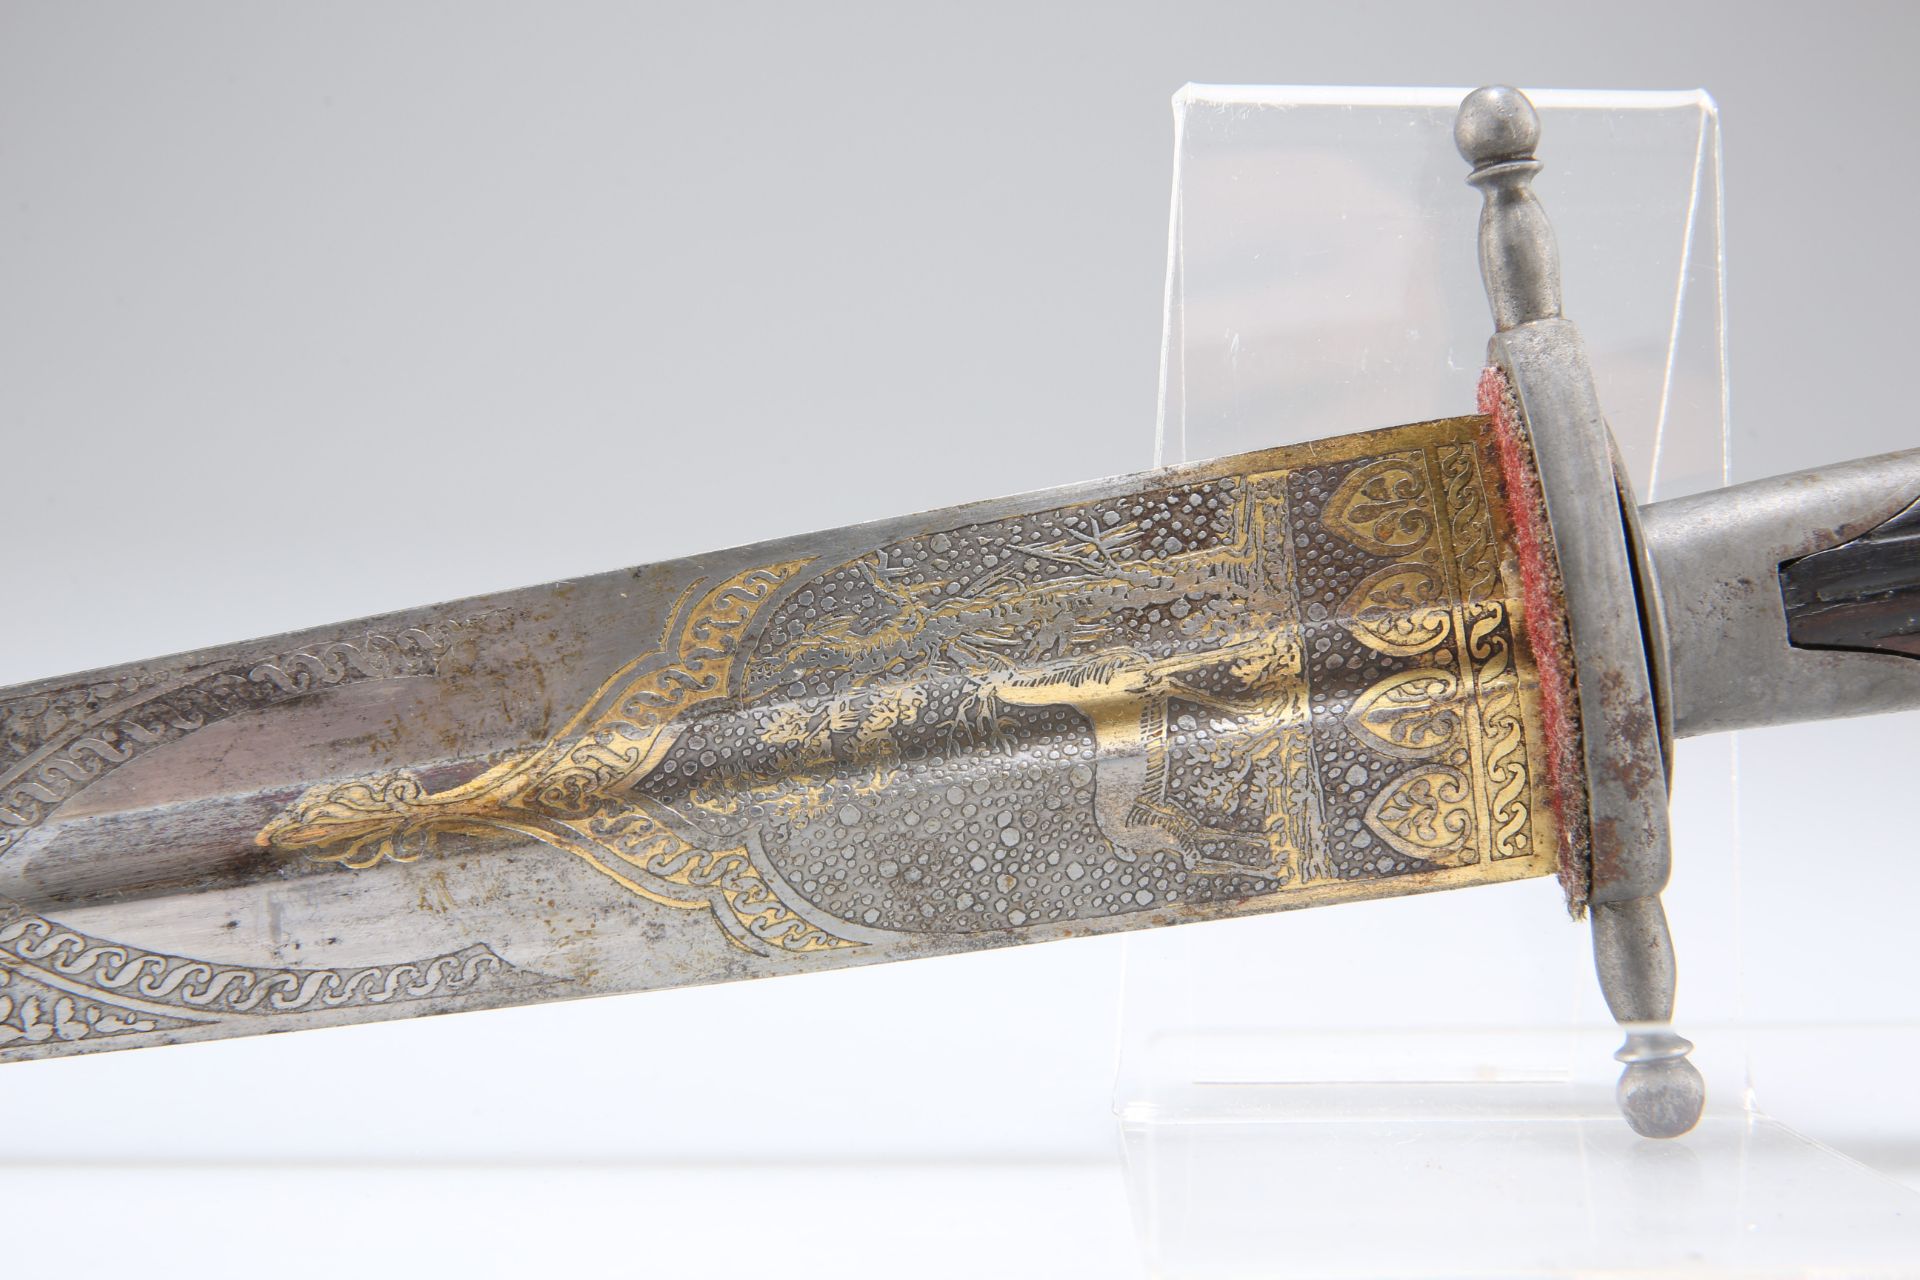 A LATE 19TH CENTURY RUSSIAN HUNTING DAGGER - Image 6 of 6